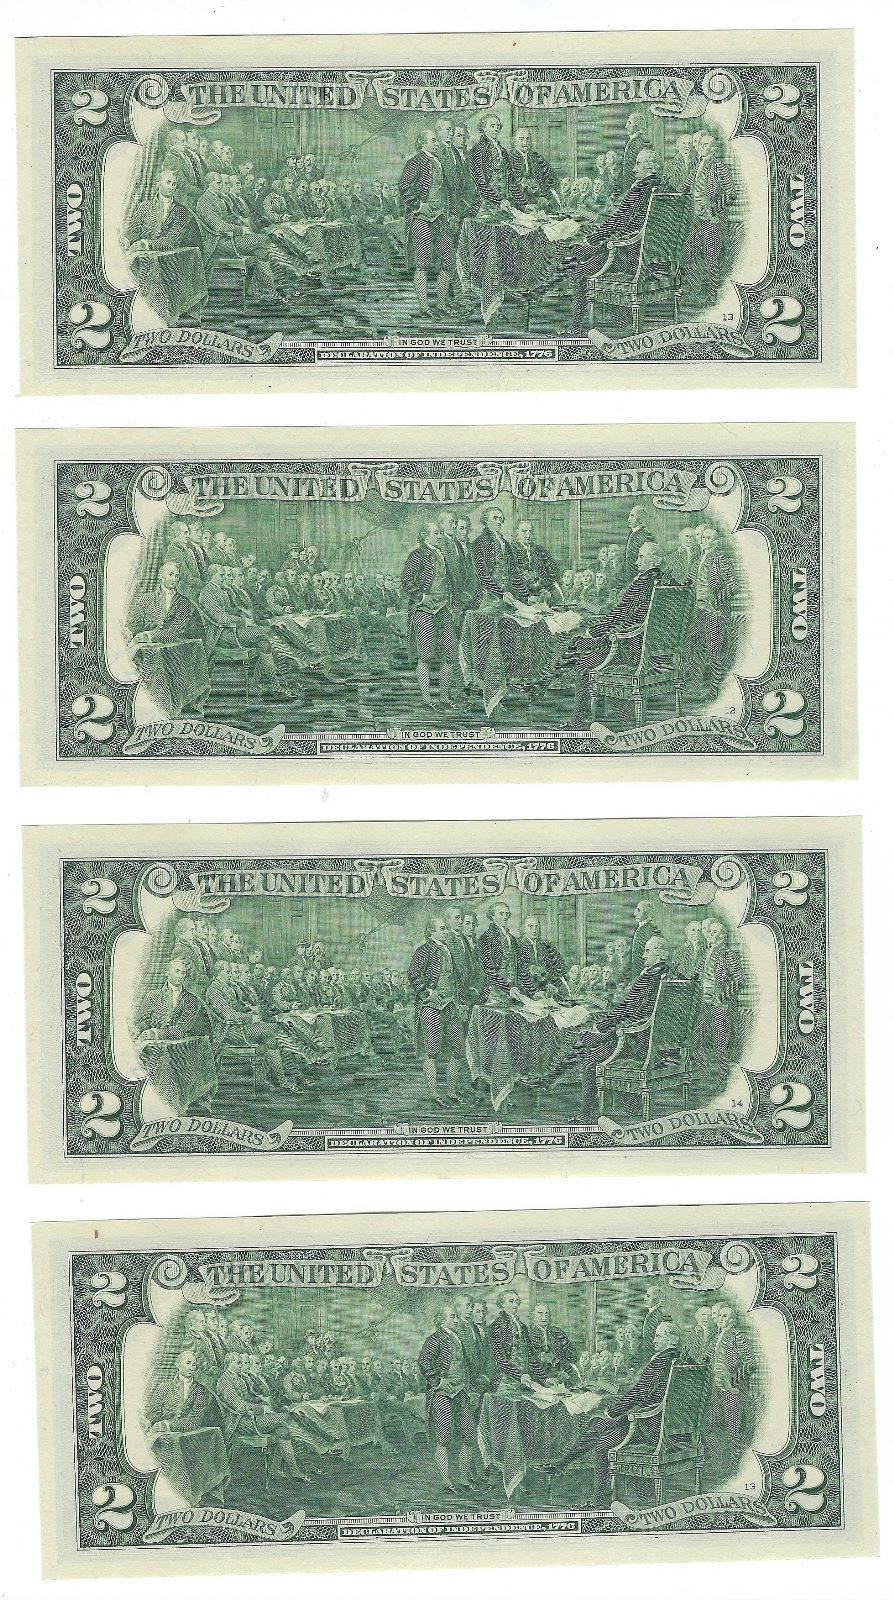 US$2 FRN Chicago 7G x 8 Fancy SN Notes All Ending 62 UNC.FN27?